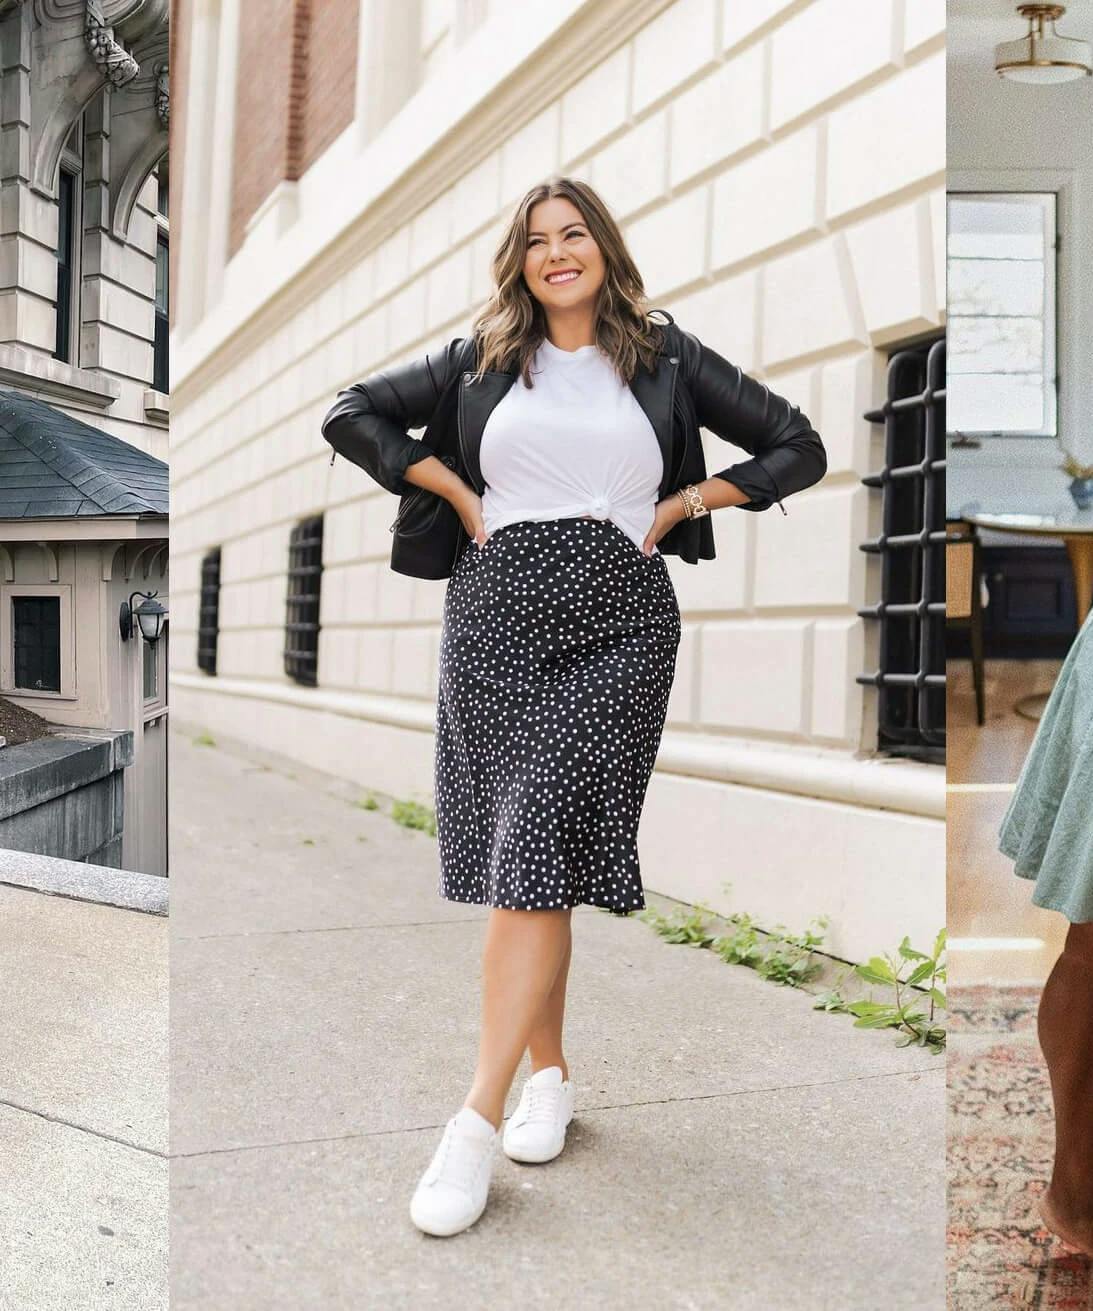 The Best Influencers To Follow Based On Your Body Type instagram